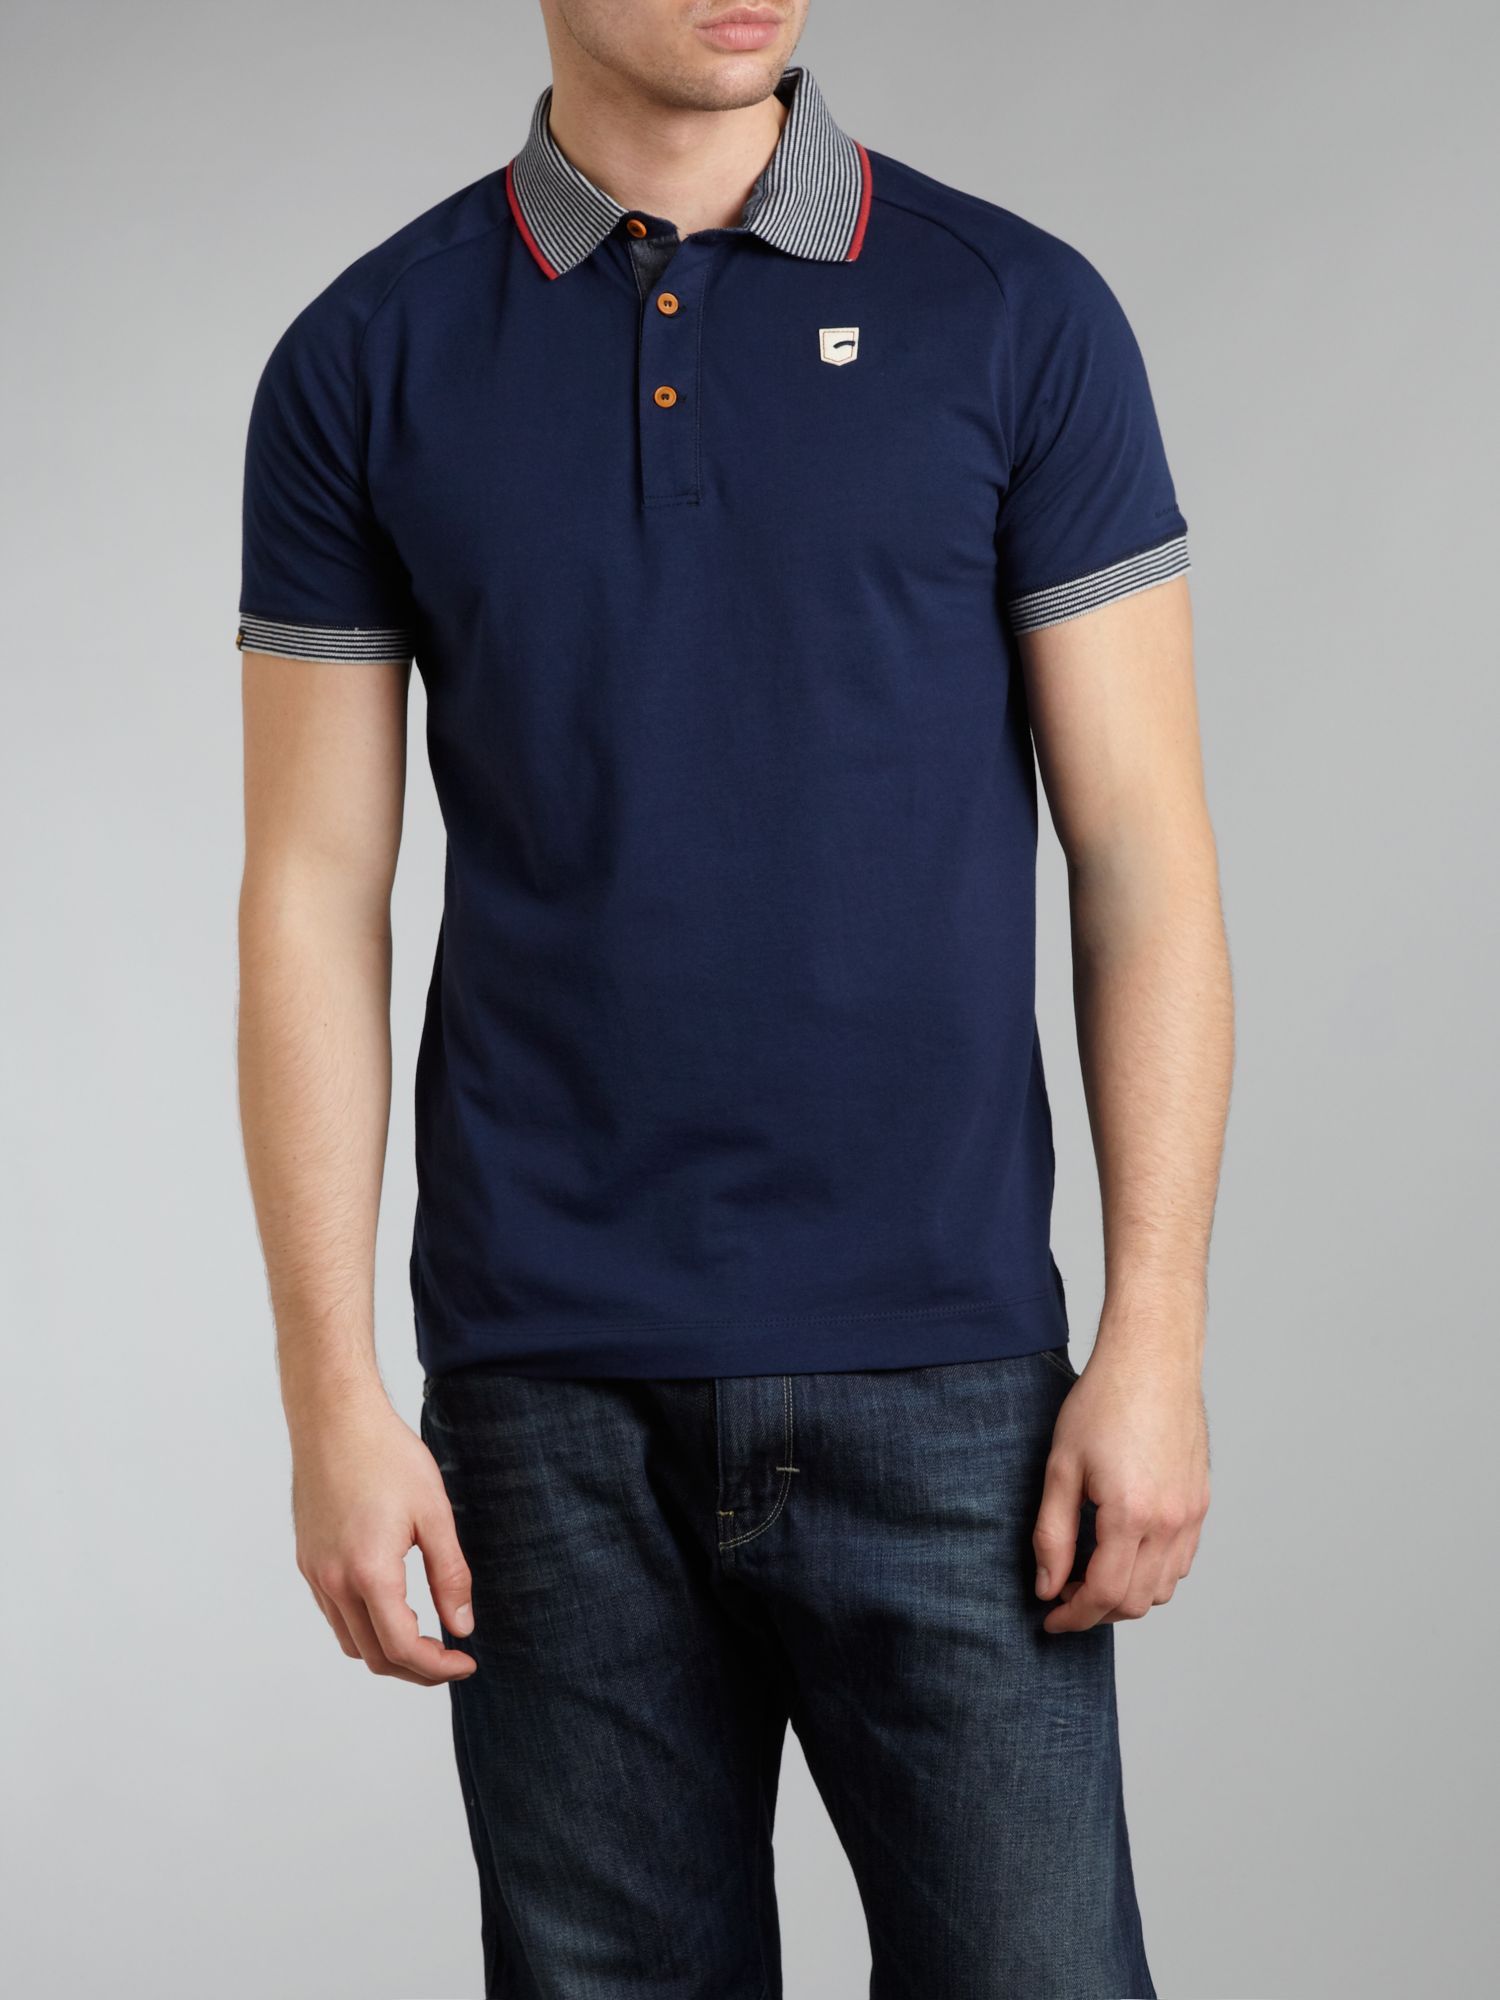 G-star raw Coloured Collar Polo Shirt in Blue for Men | Lyst